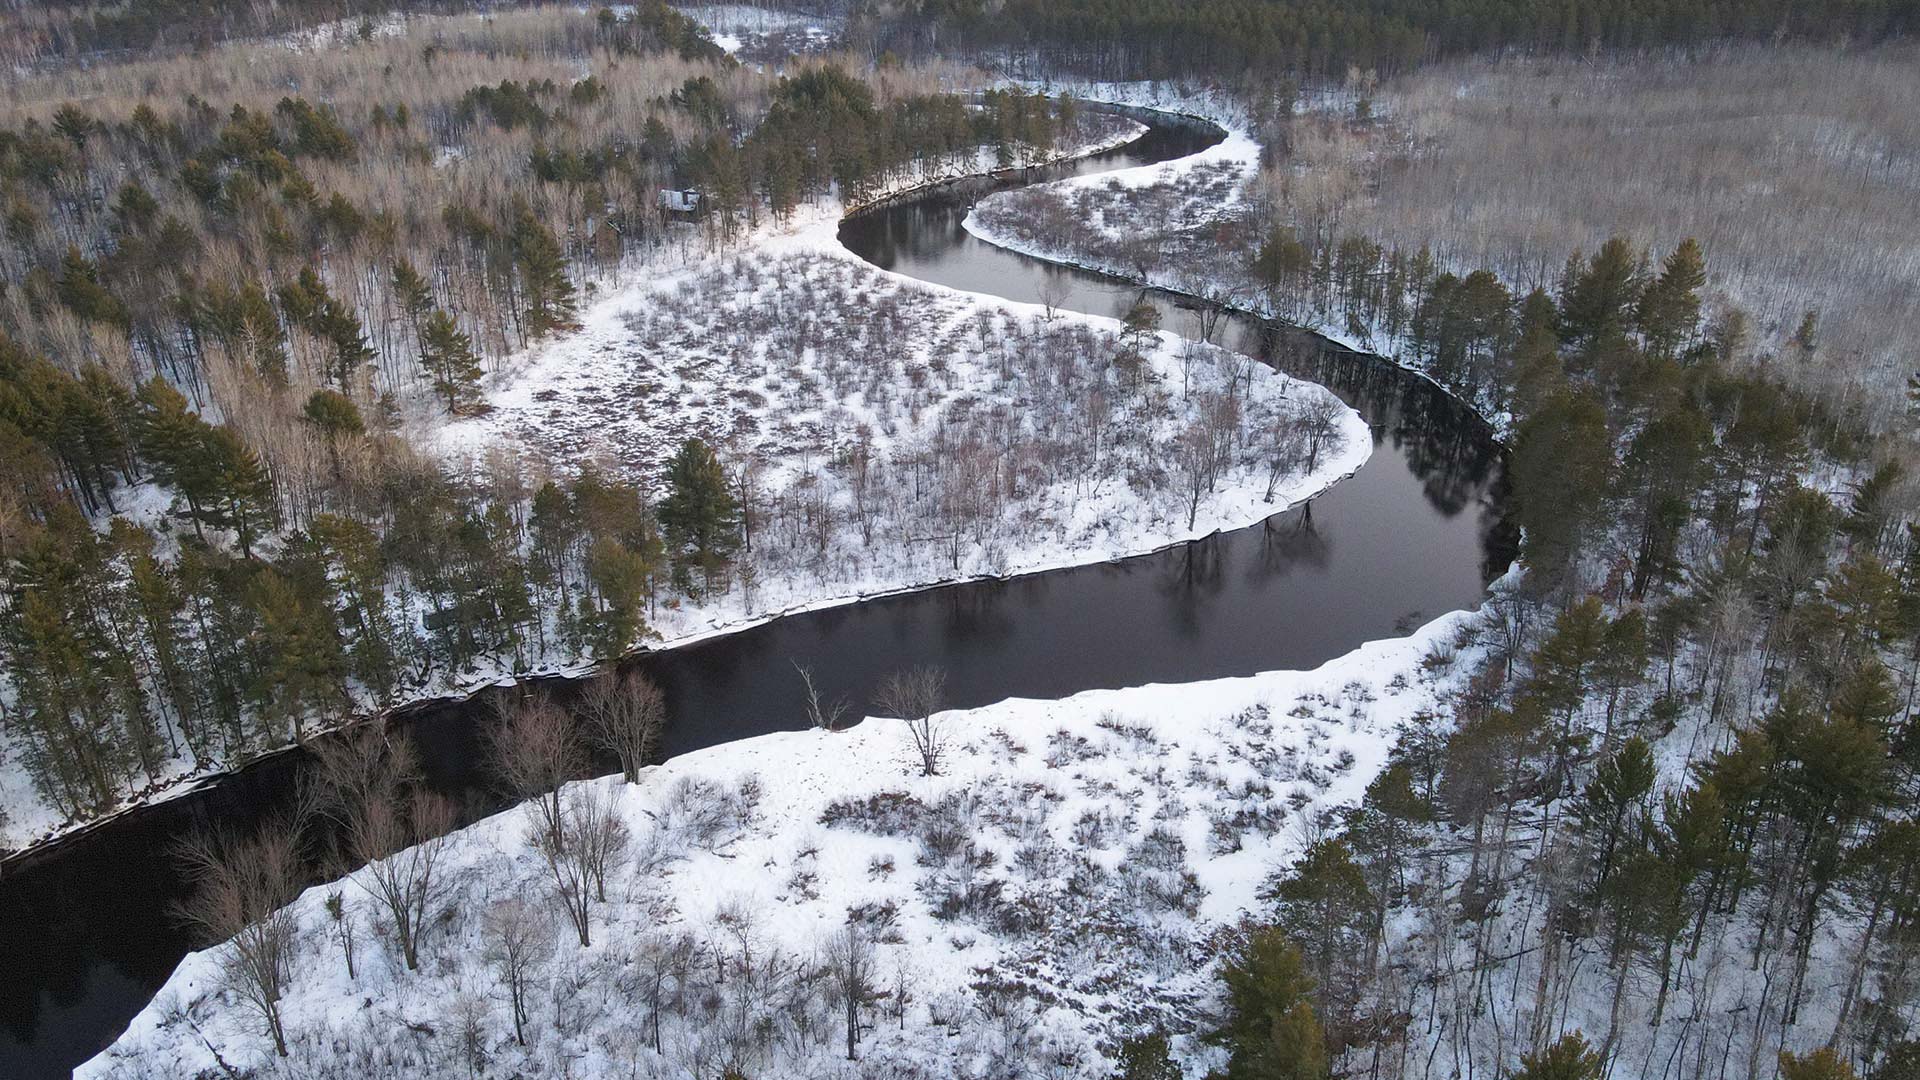 Drone photo of river surrounded by snow